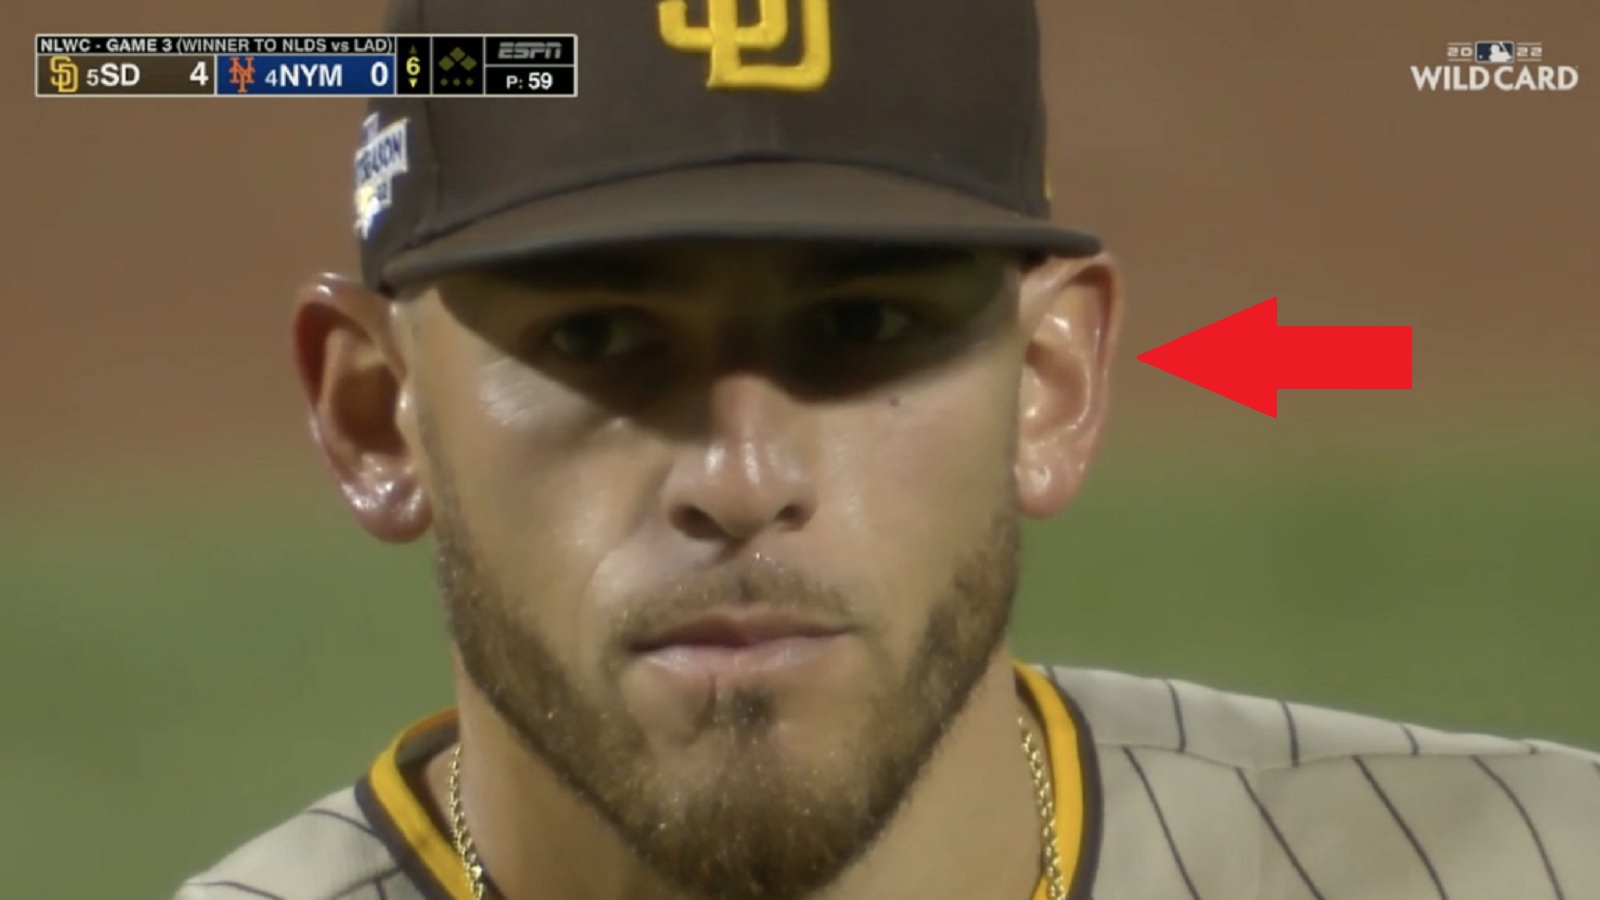 MLB player has theory about what was on Joe Musgrove's ears